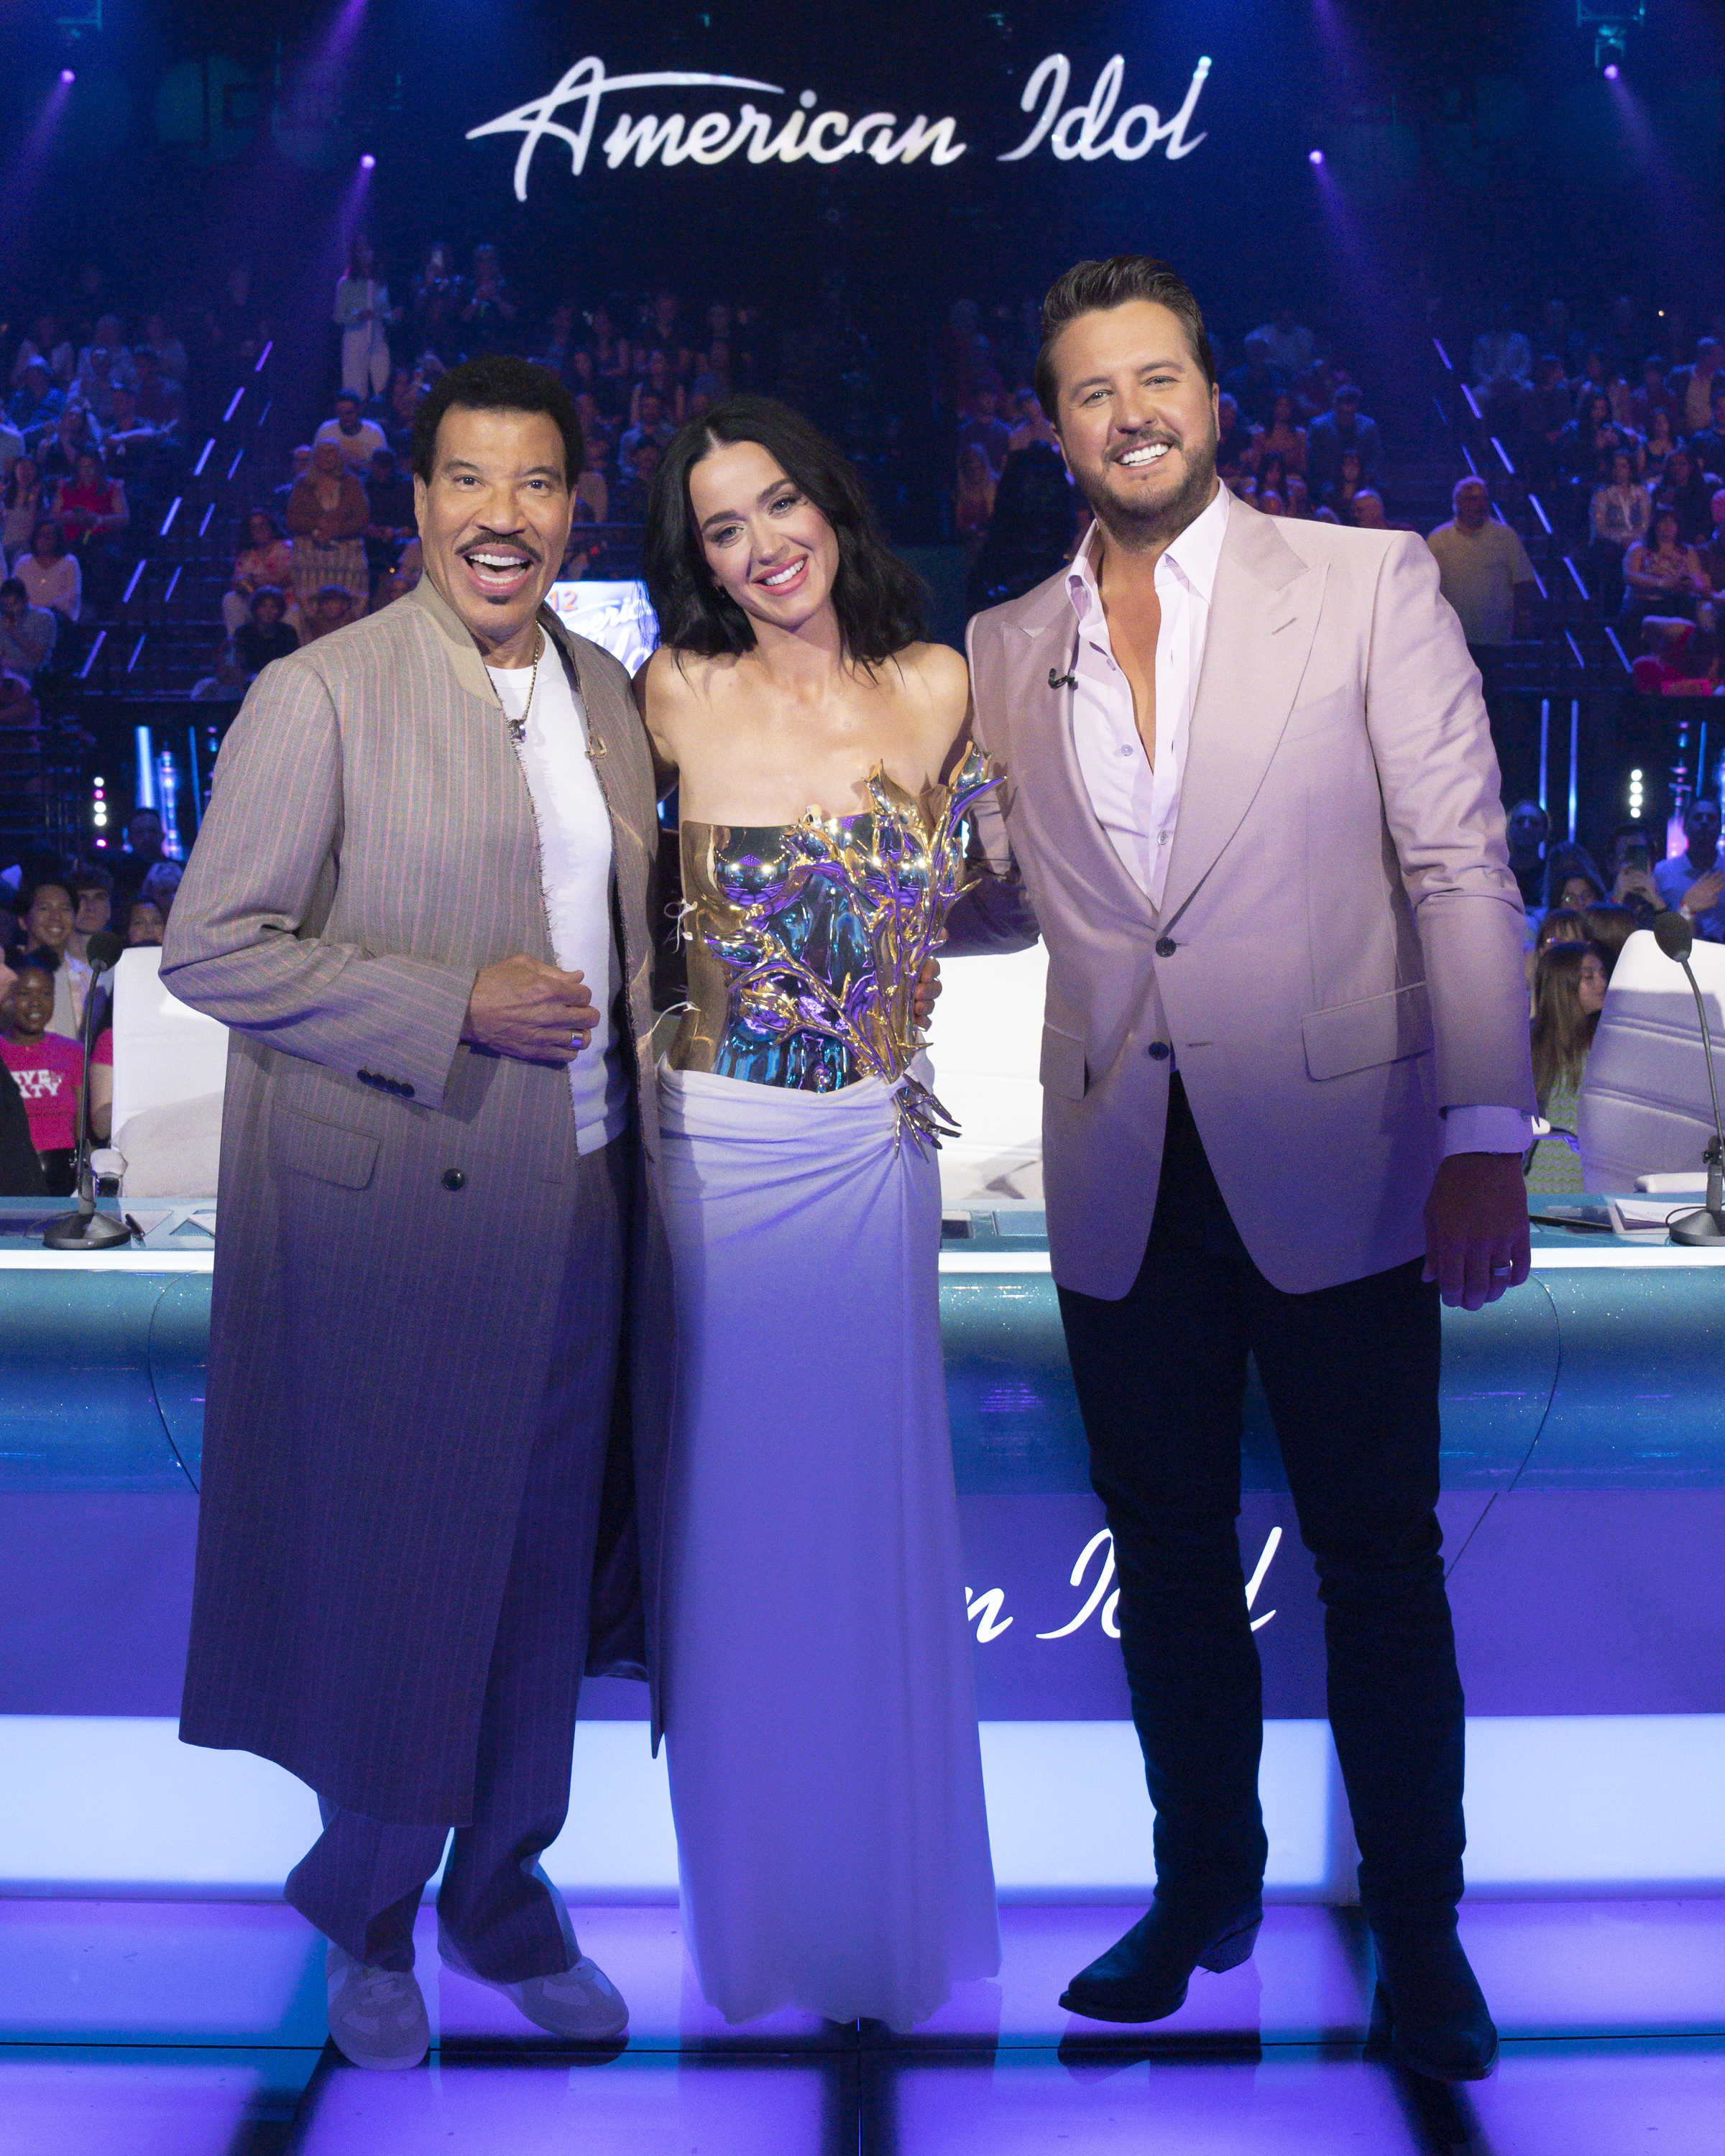 Katy co-hosts with Luke Bryan and Lionel Richie